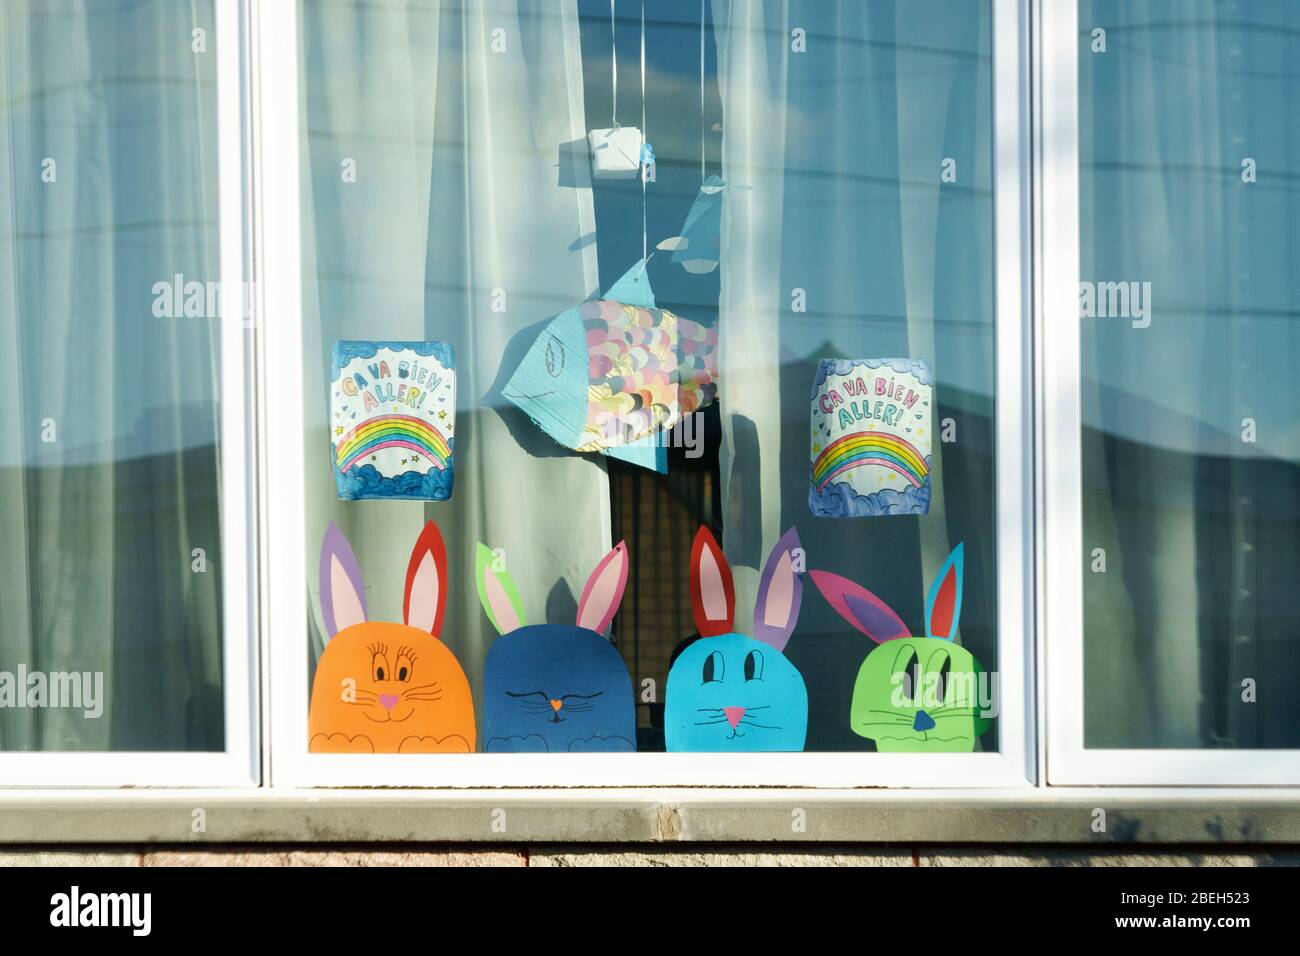 Ça va bien aller message with rainbow and Easter Bunny drawings in a window during the Covid 19 pandemy in Province of Quebec, Canada. Stock Photo